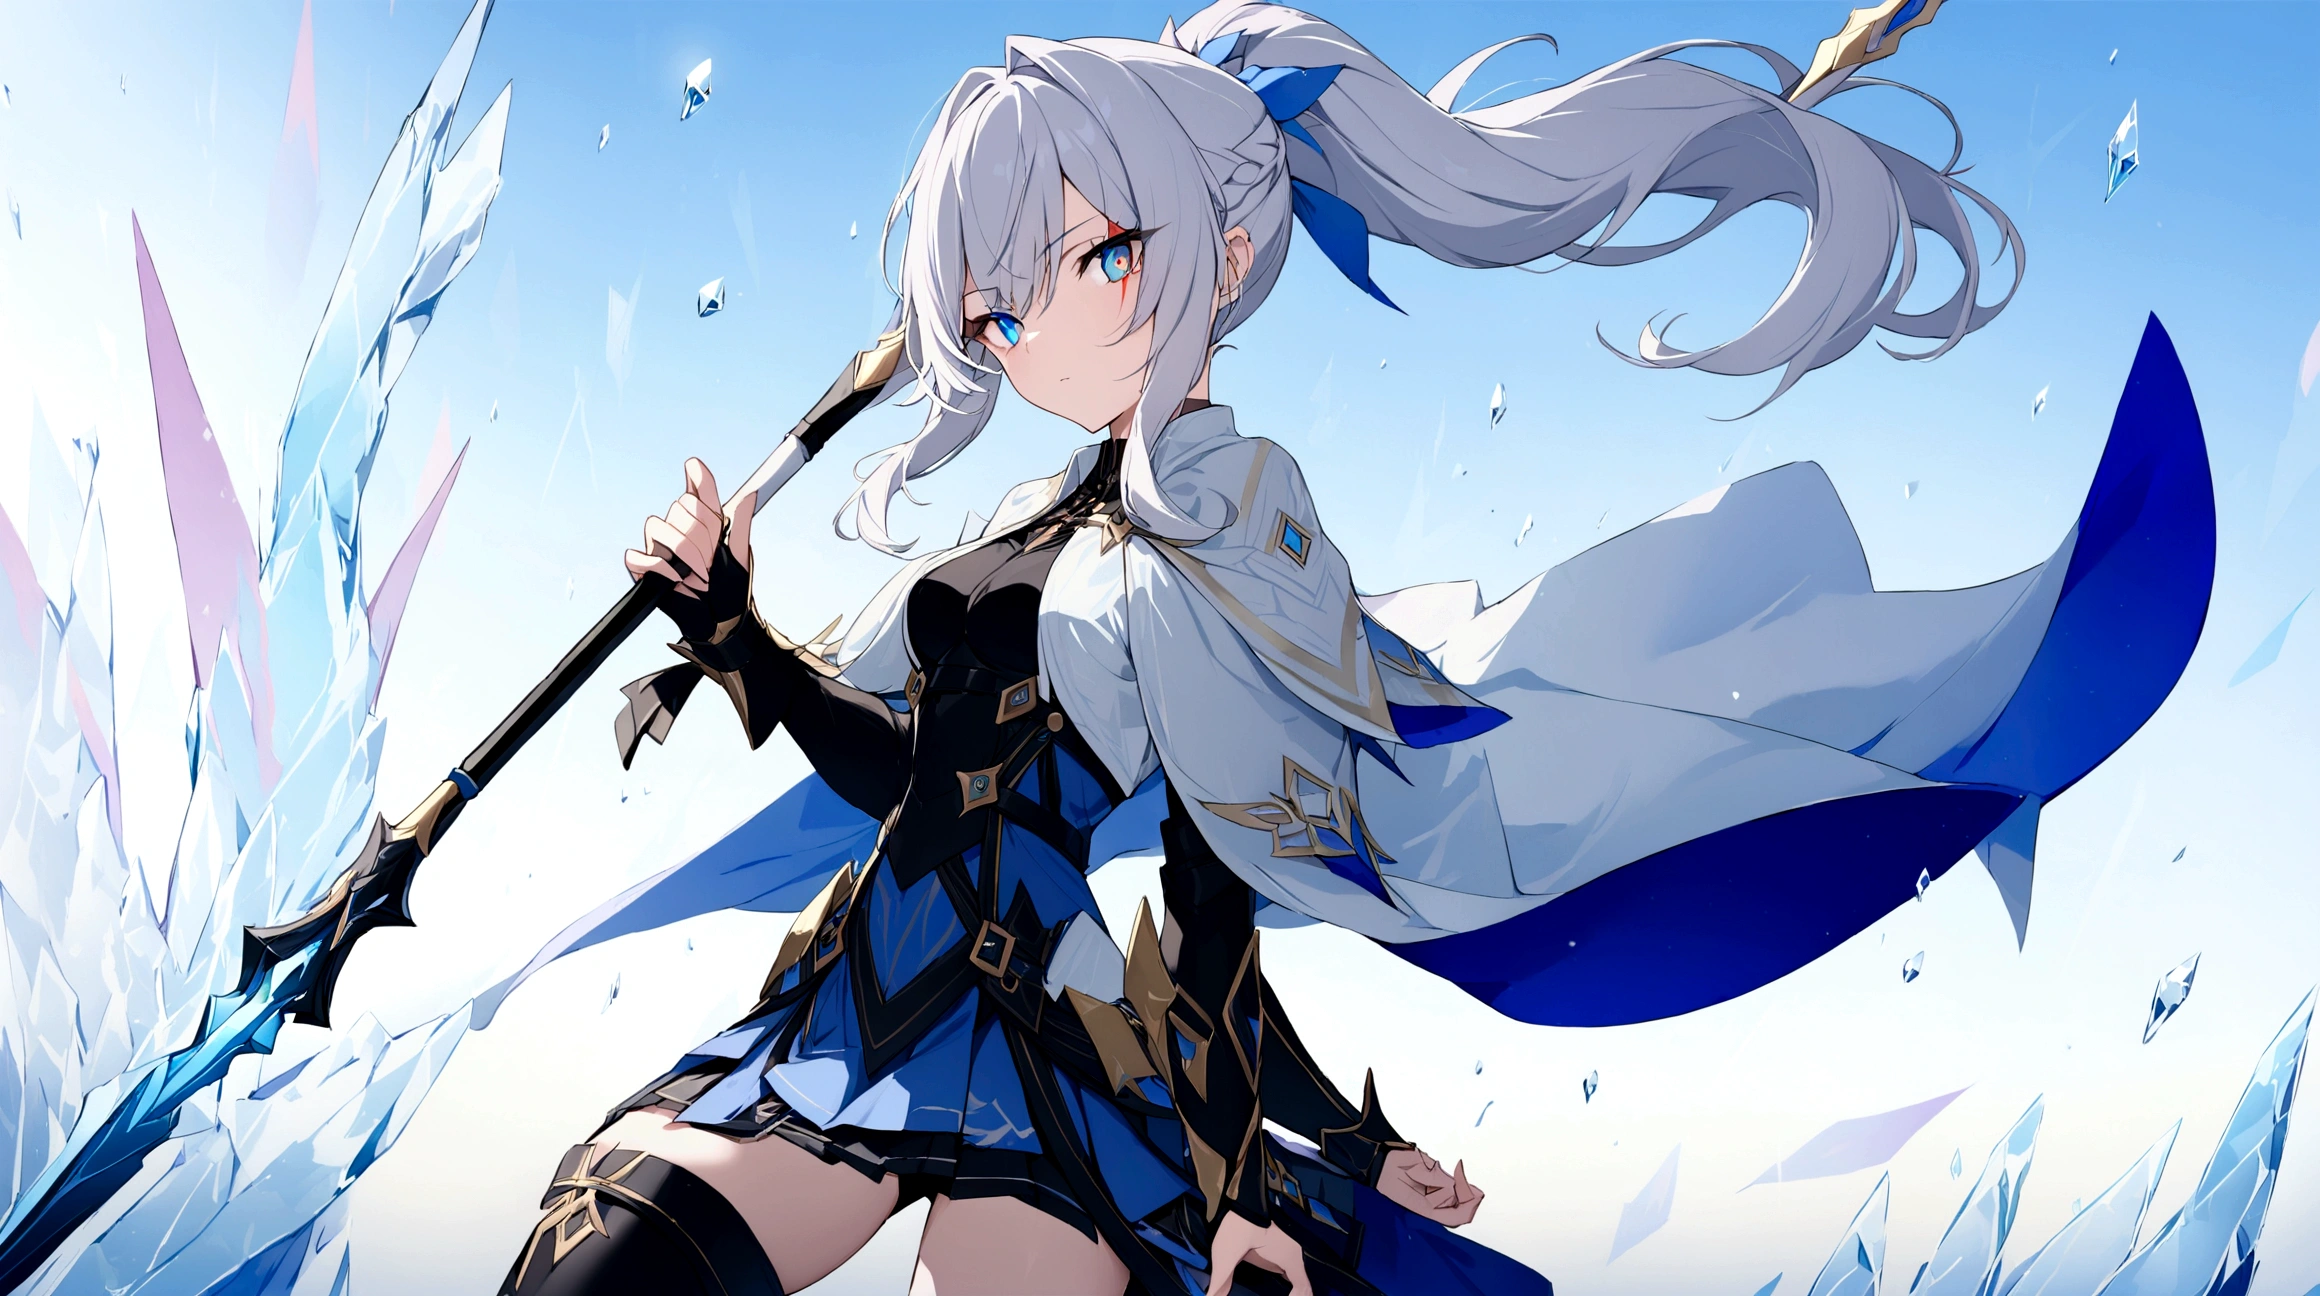 (1girl, Masterpiece, best quality) (detailed and beautiful eyes:1.6) (perfect hands, perfect anatomy) (full body)) Fierce warrior girl with long white hair in a high ponytail and striking red eyes. She wears sleek, modern armor in blue and black with gold and silver details, and a white, high-collared cape with blue and gold accents. She holds a long spear in her right hand and points forward with her left hand. The background should be an icy landscape with crystalline formations and a cold, blue sky, reflecting light off the ice for a mystical atmosphere. Capture her determined and focused expression, conveying a sense of readiness and strength.